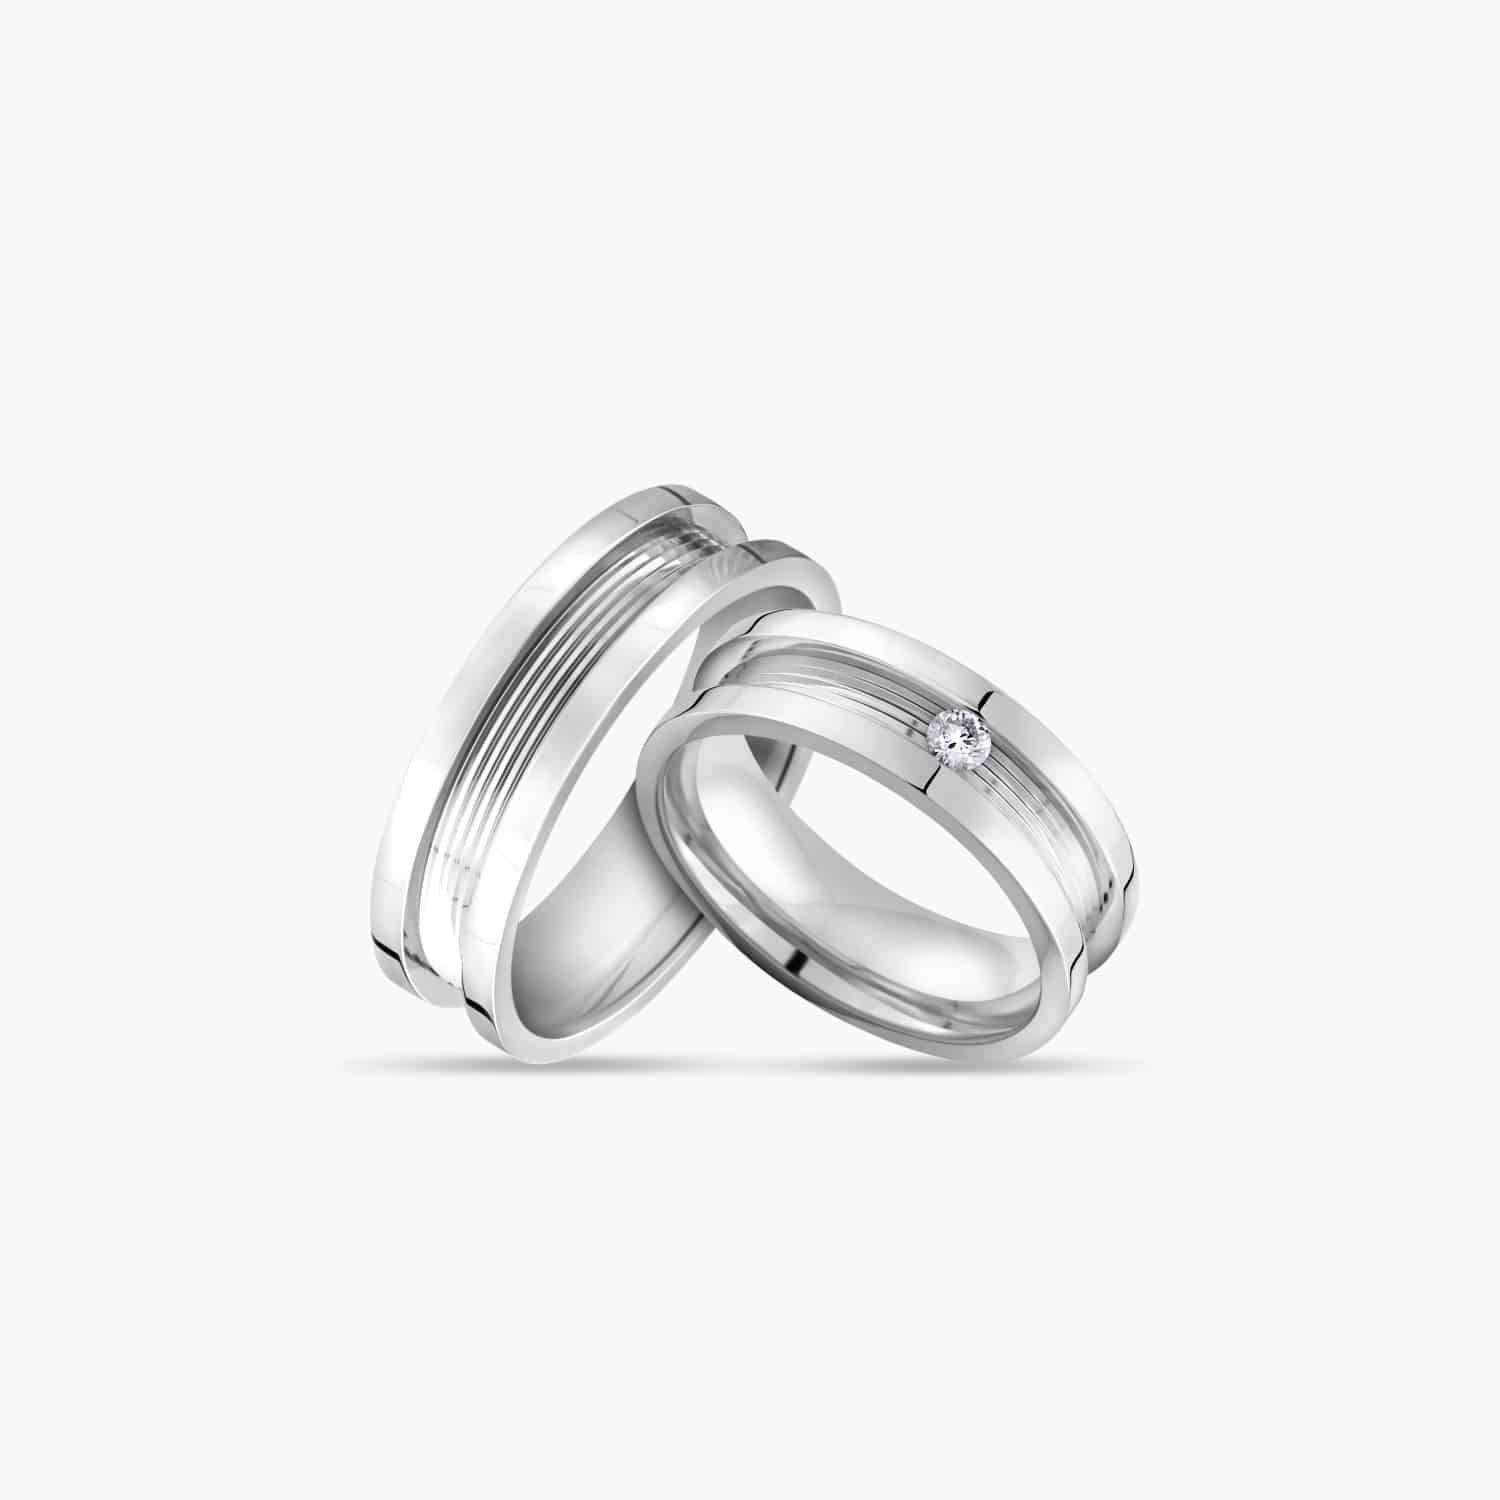 LVC PROMISE PURE WEDDING BAND IN WHITE GOLD a set of white gold engagement wedding ring or wedding bands in white gold with diamond 钻石 戒指 cincin diamond